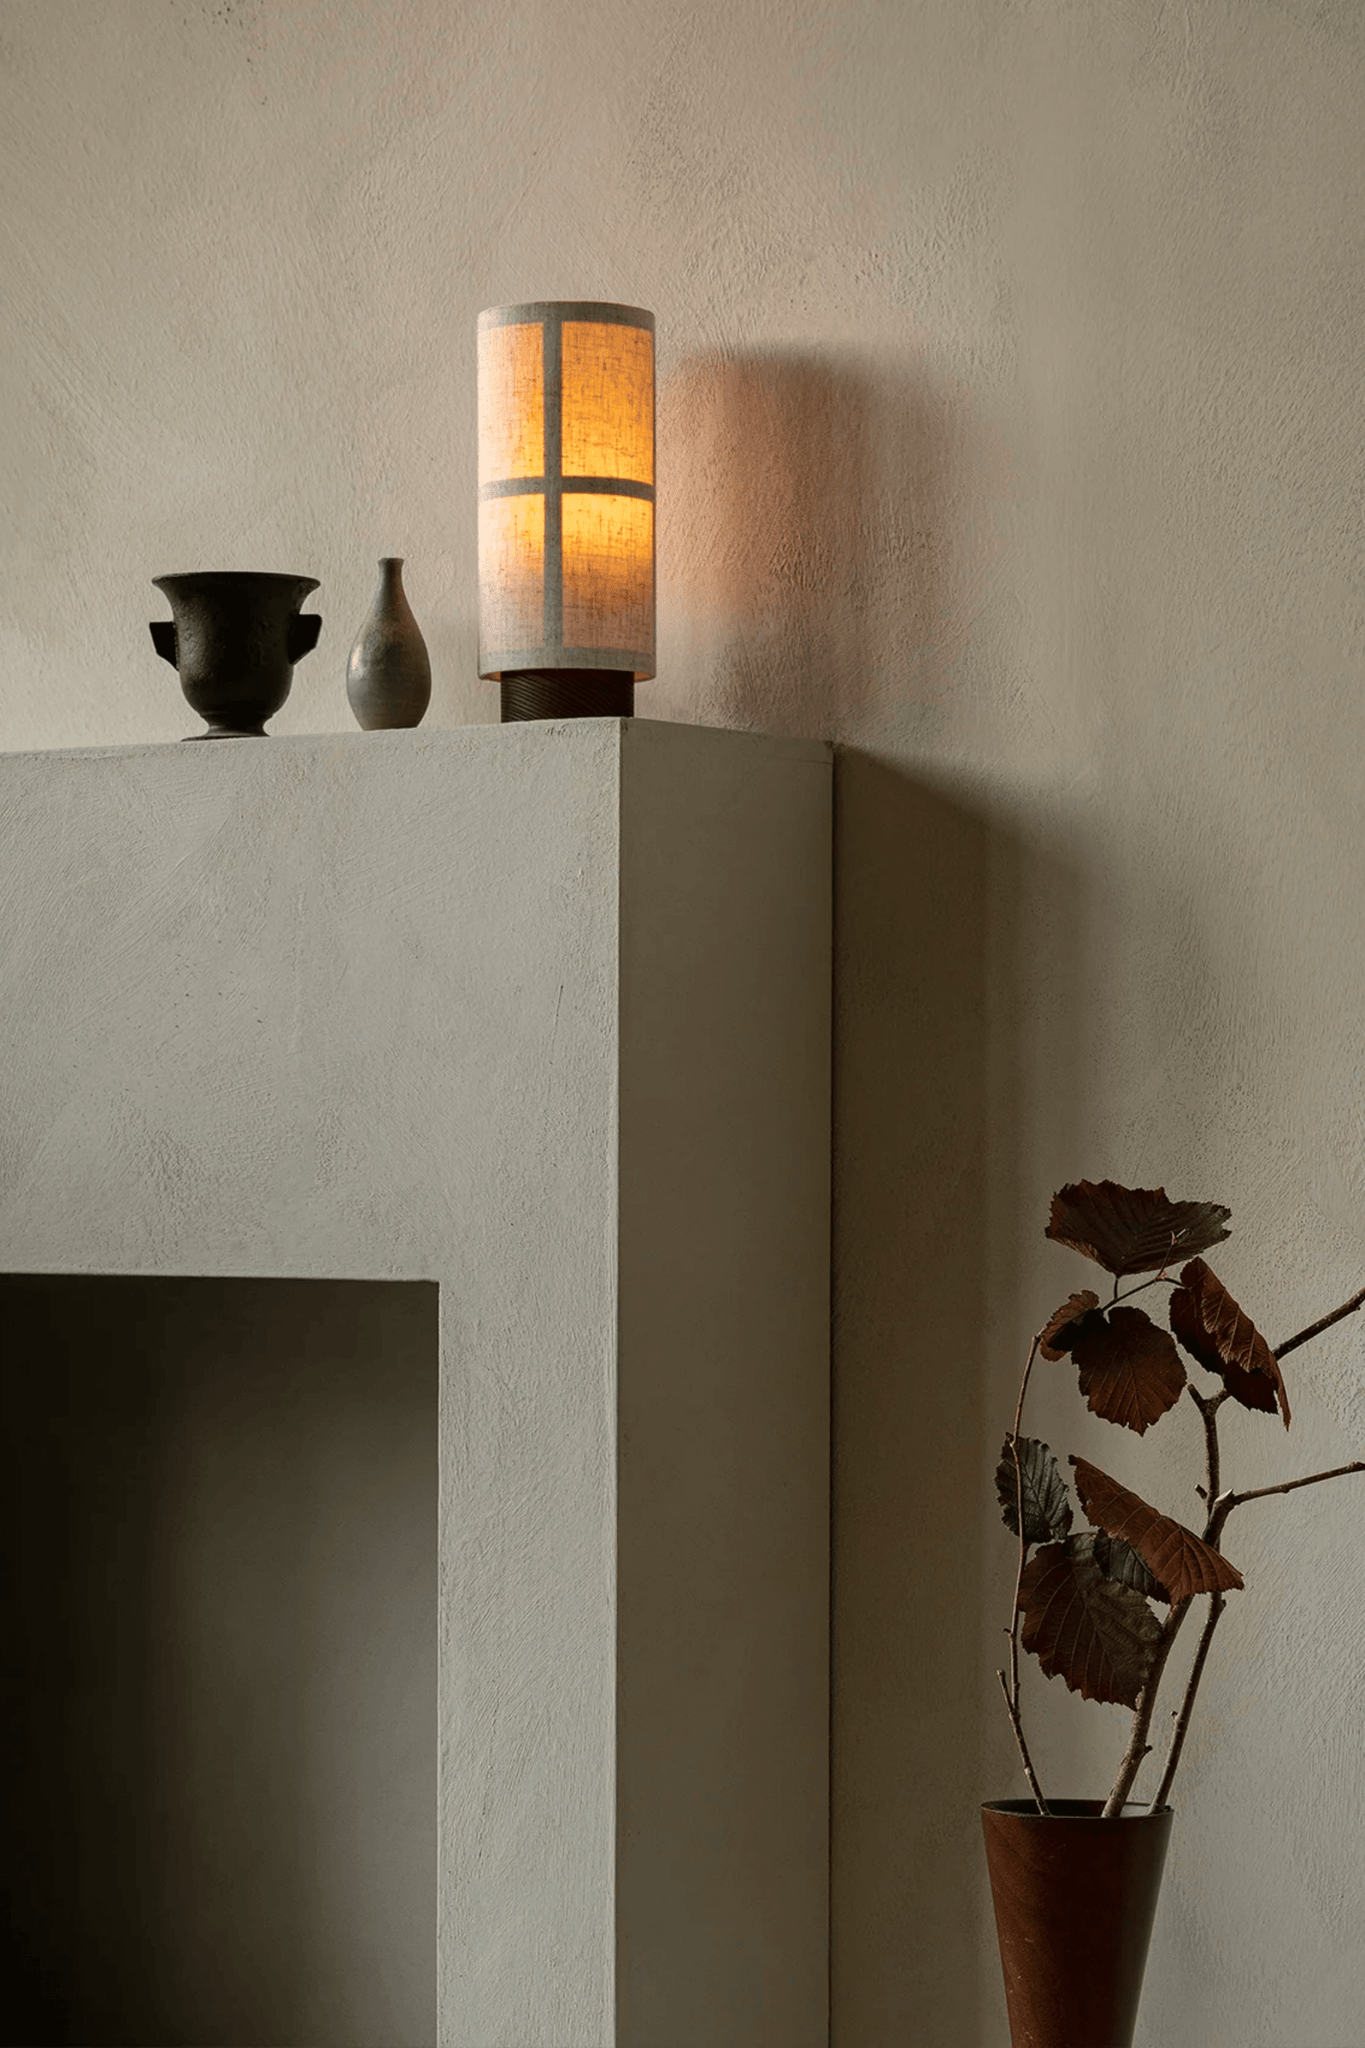 Raw Hashira Portable Table Lamp by Menu, shown on a mantle, lit